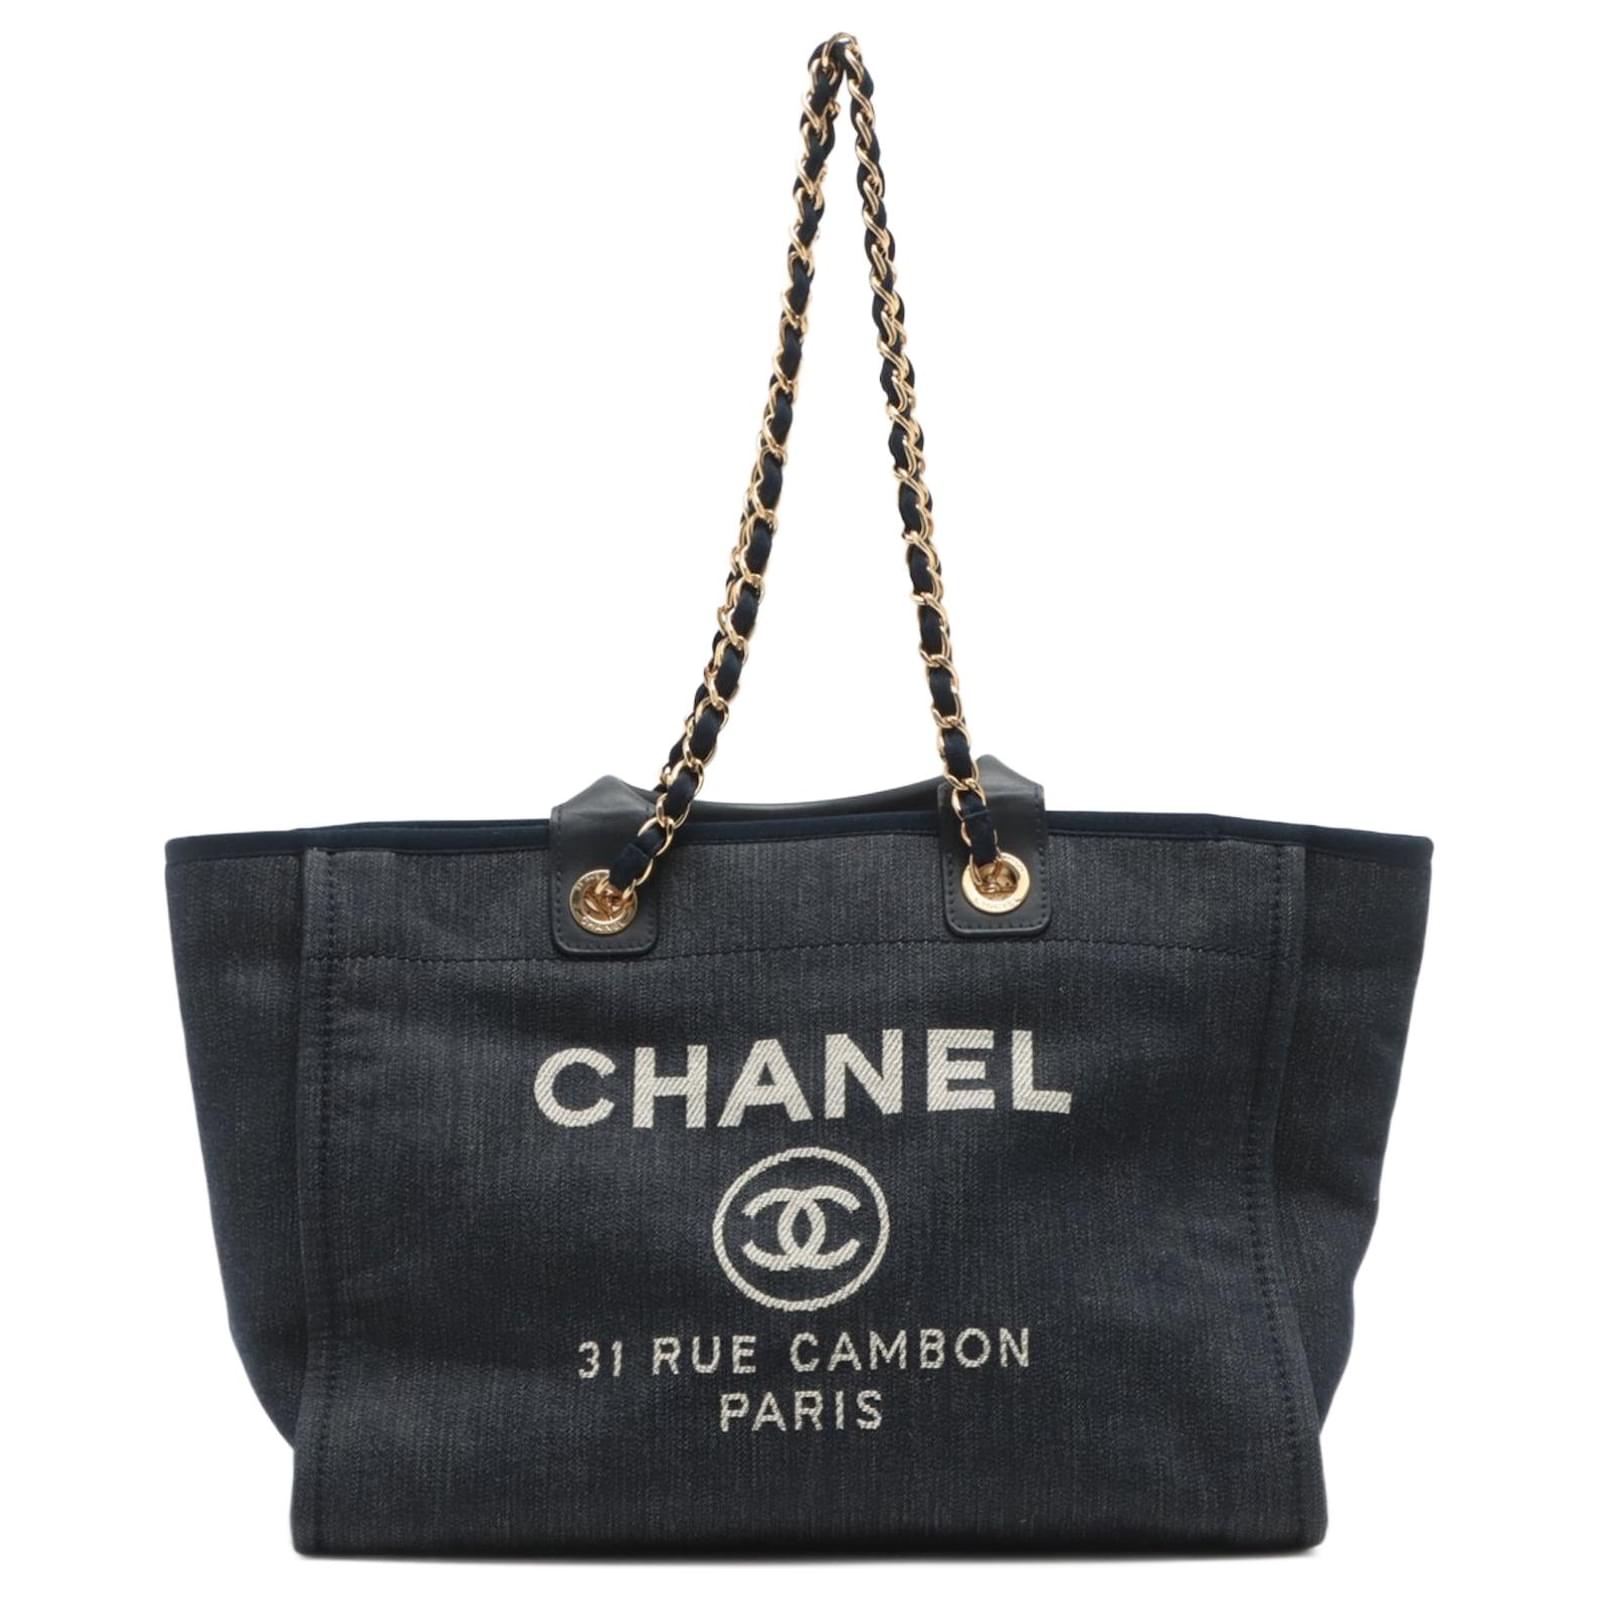 30 Like New Chanel Deauville Tote Large Shopping Bag Dark Denim